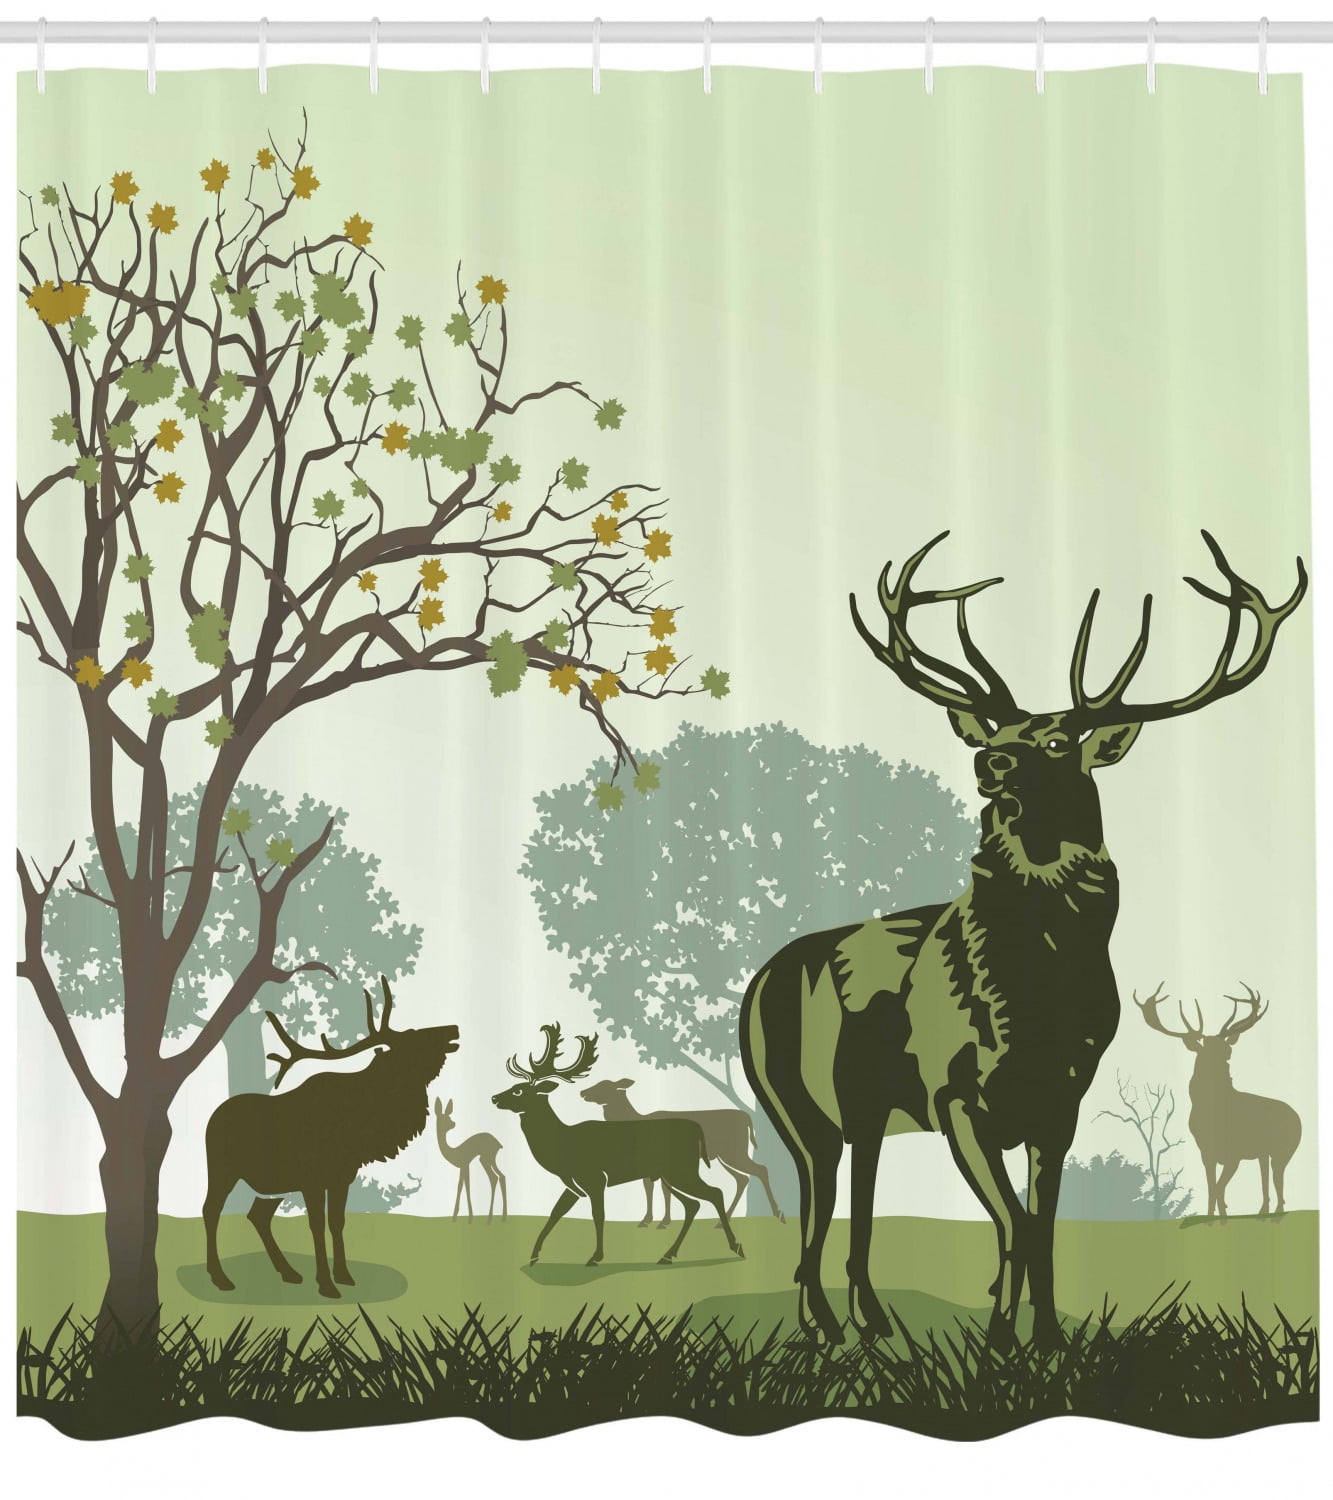 Details about   Abstract Painting Deers Elk in Forest Green Waterproof Fabric Shower Curtain Set 